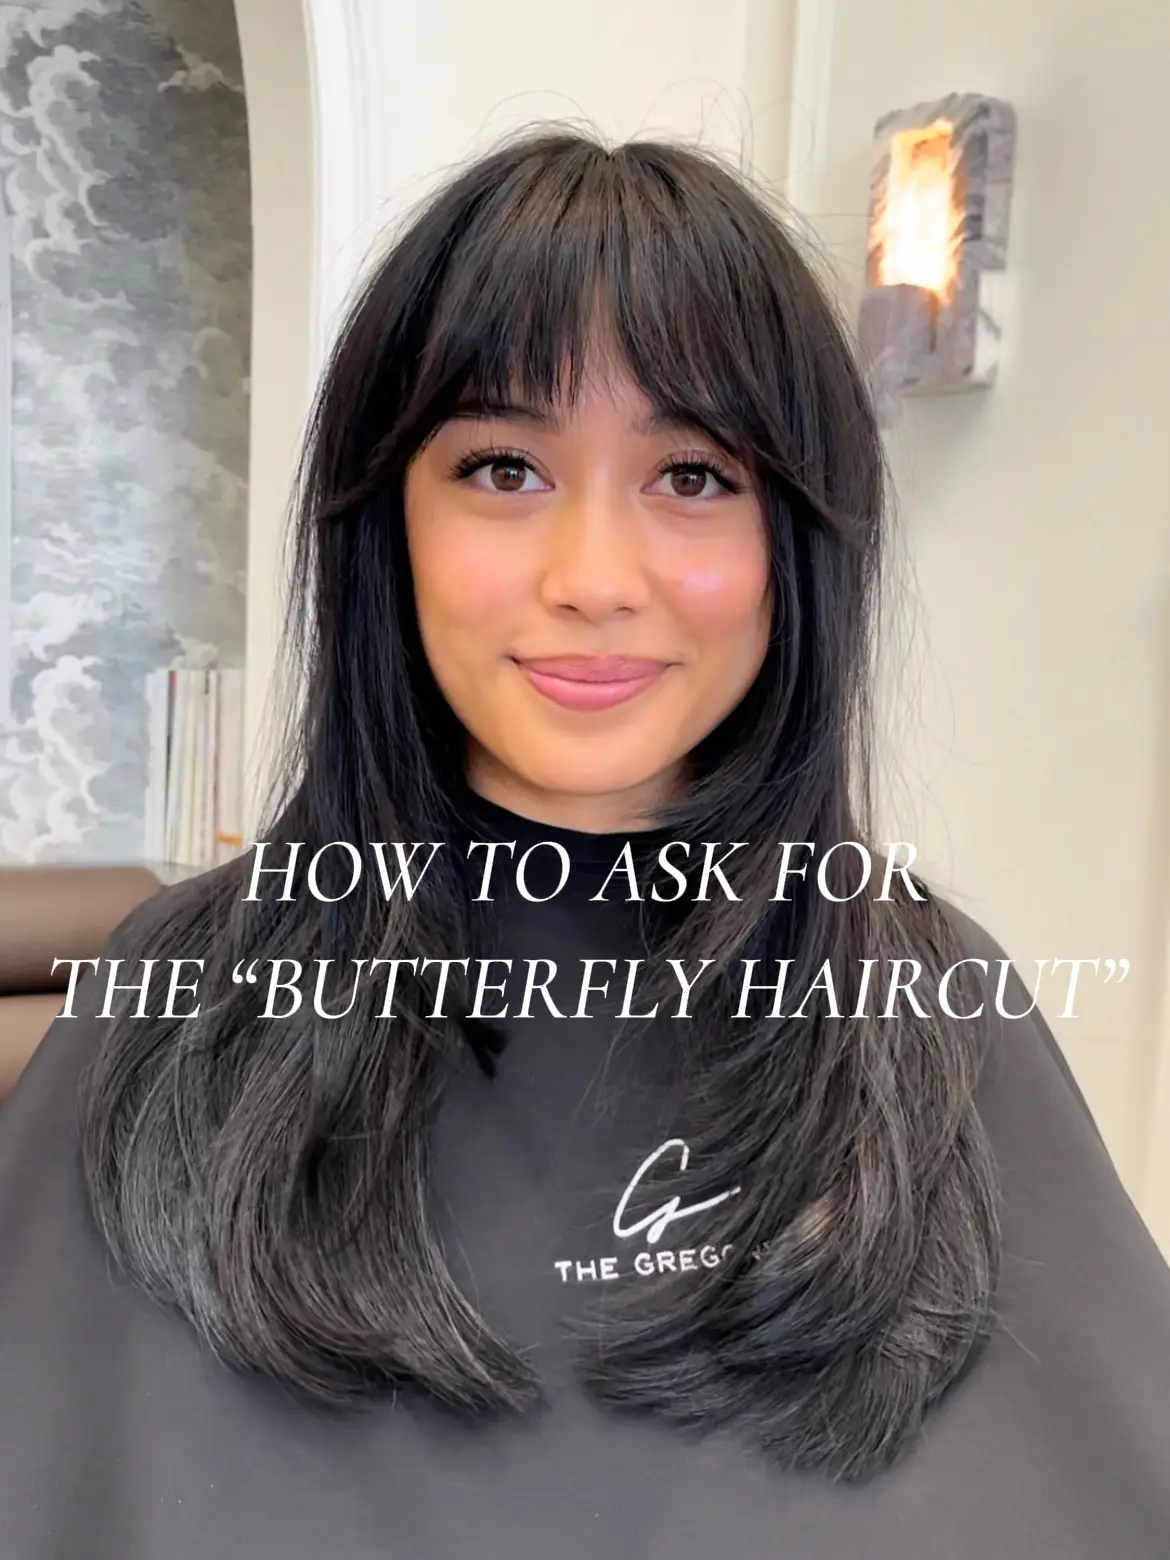 I Got the Butterfly Haircut: See Photos